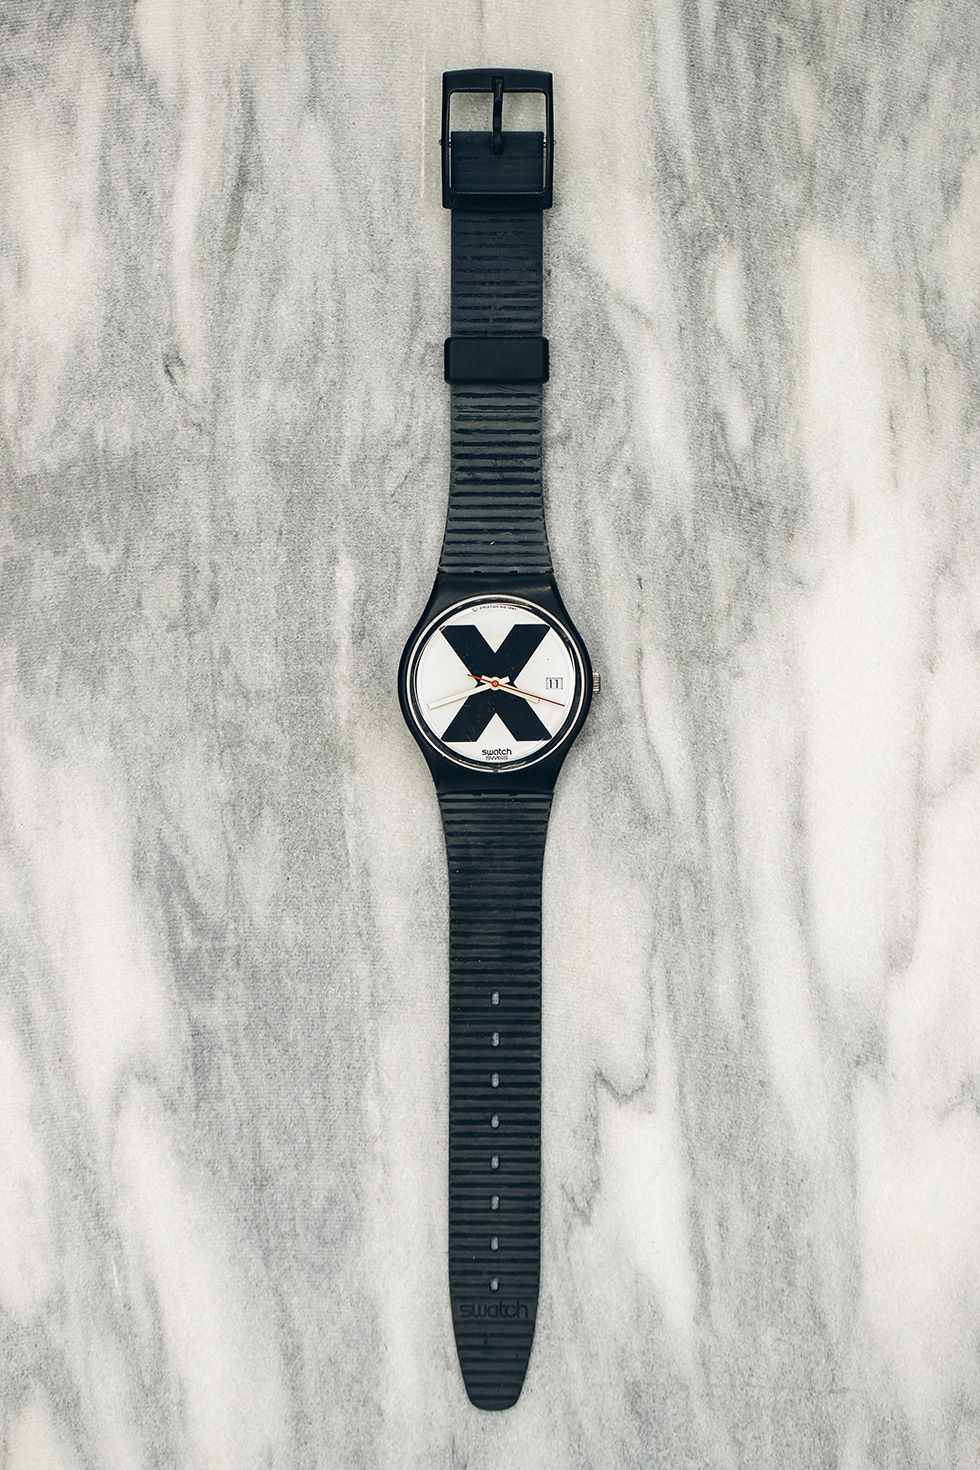 Swatch X-rated, 1987